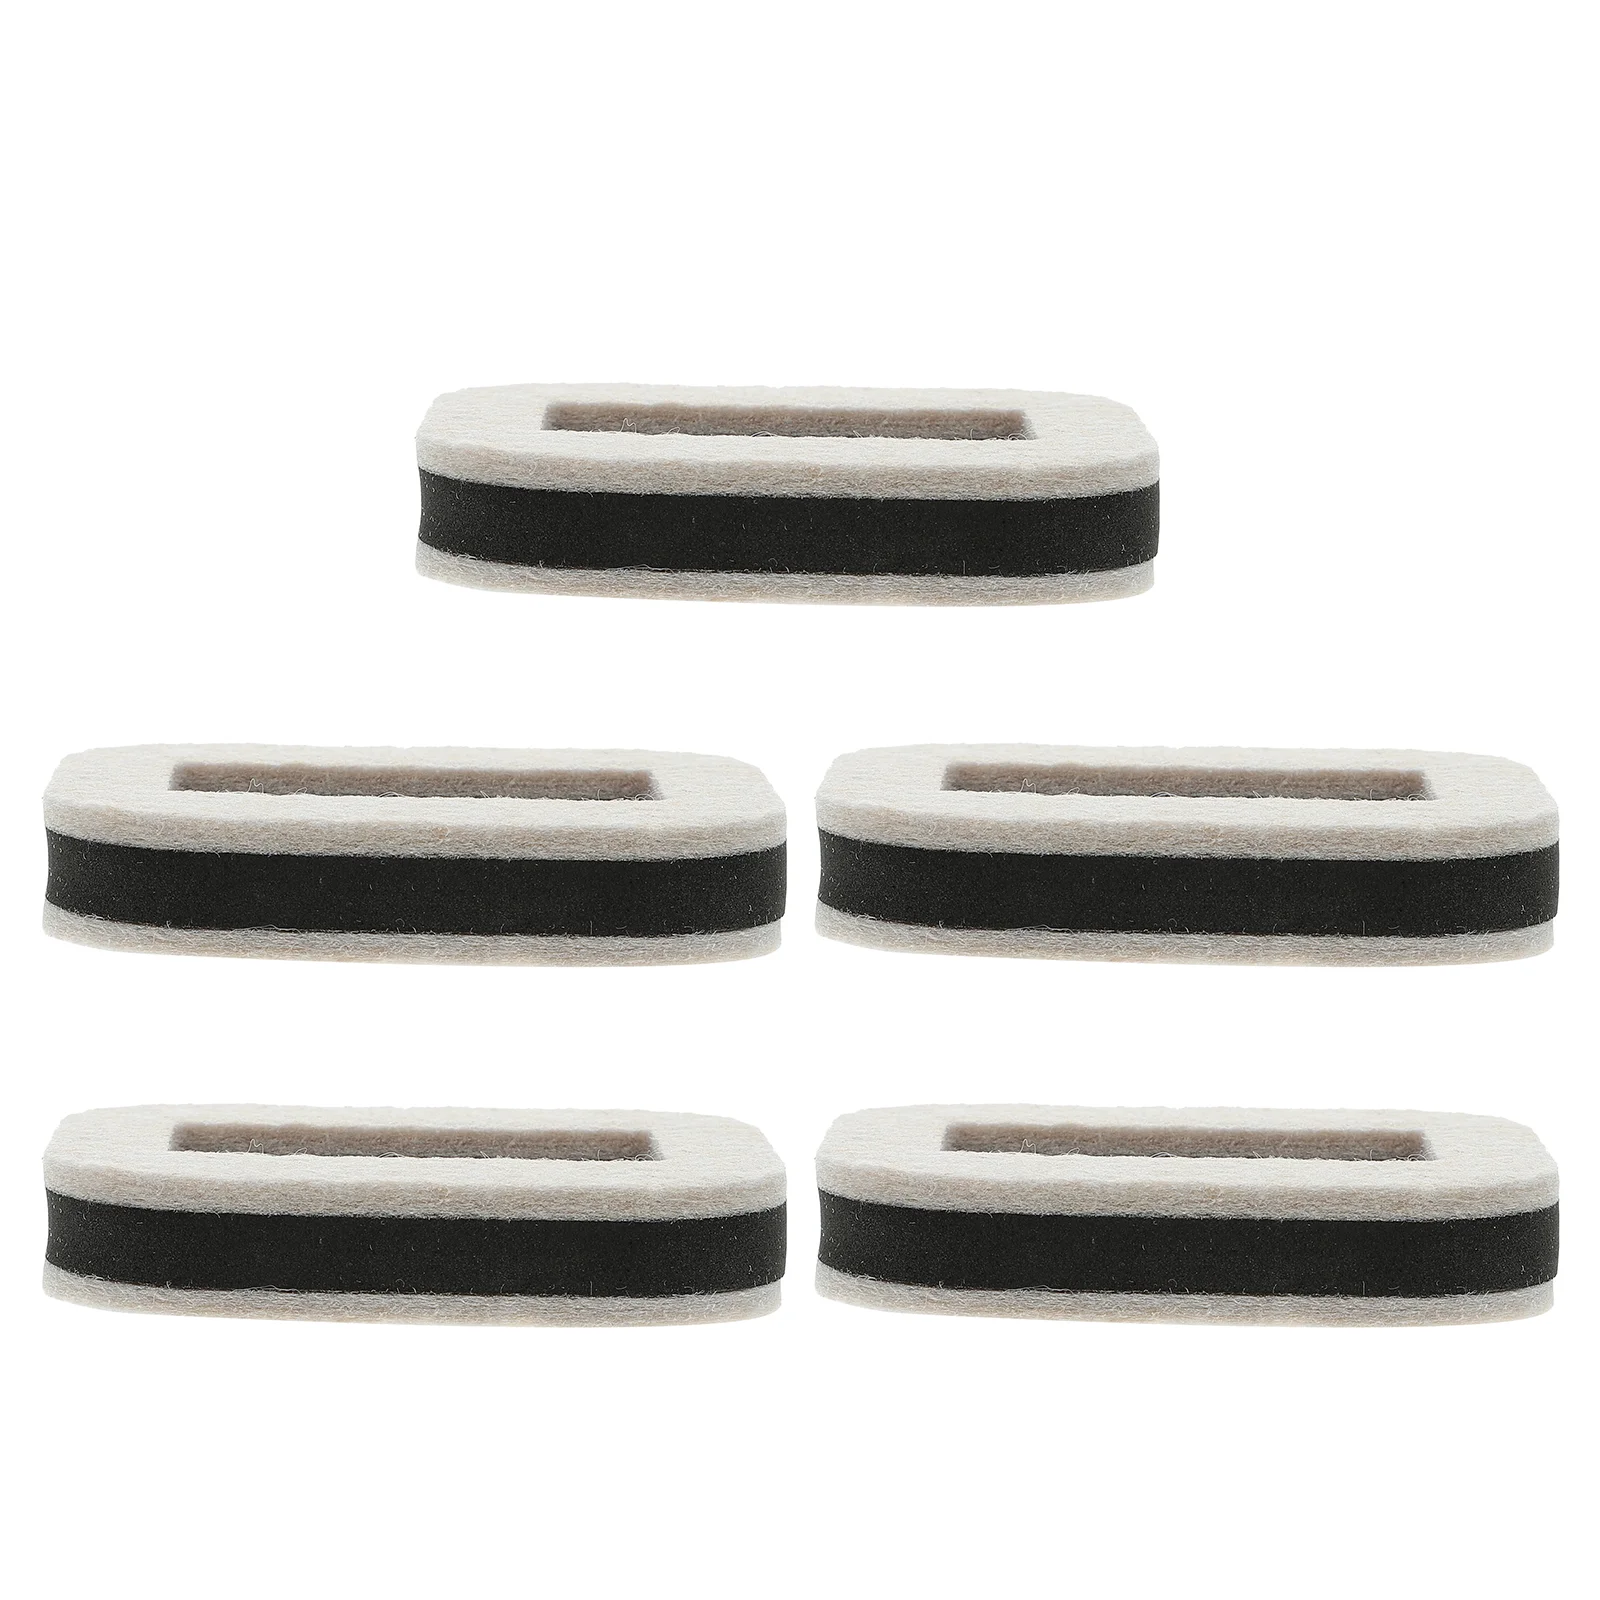 

Bed Stoppers Felt Furniture Pads Office Chair Casters Stoppers Caster Cups Chair Feet Floor Protectors Felt Pads Bottom